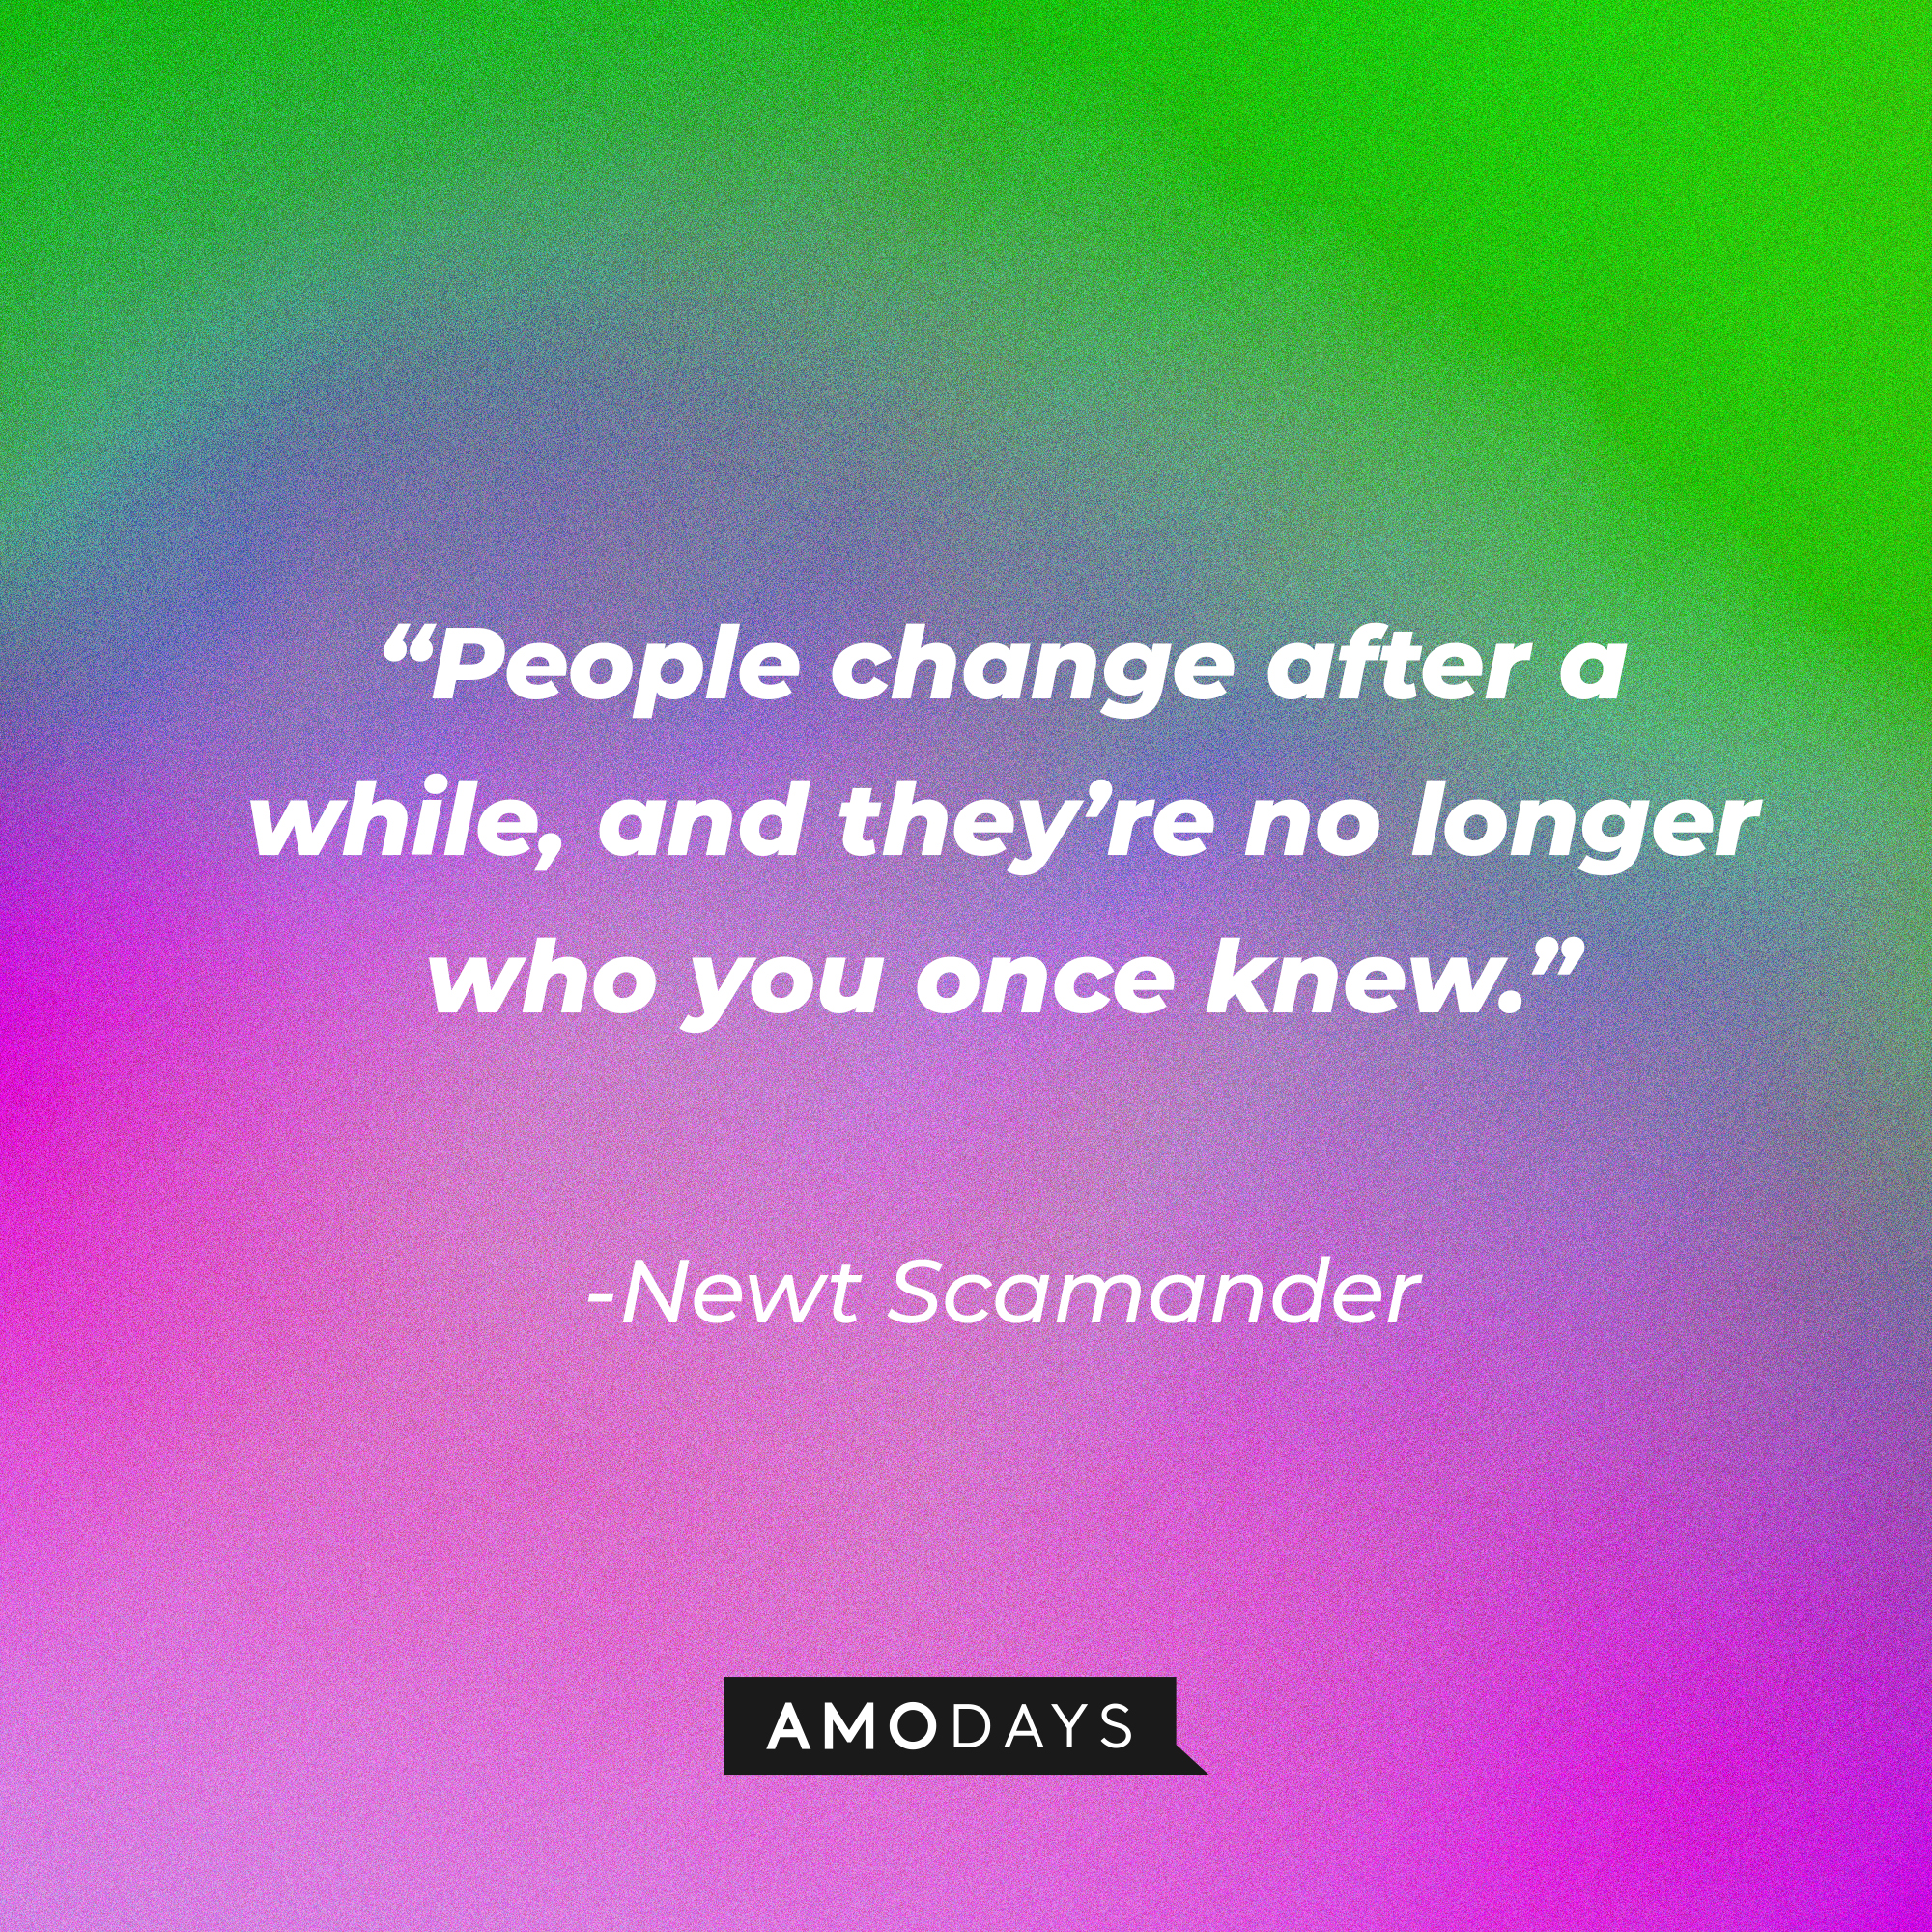 New Scamander's quote: "People change after a while, and they're no longer who you once knew." | Source: facebook.com/fantasticbeastsmovie